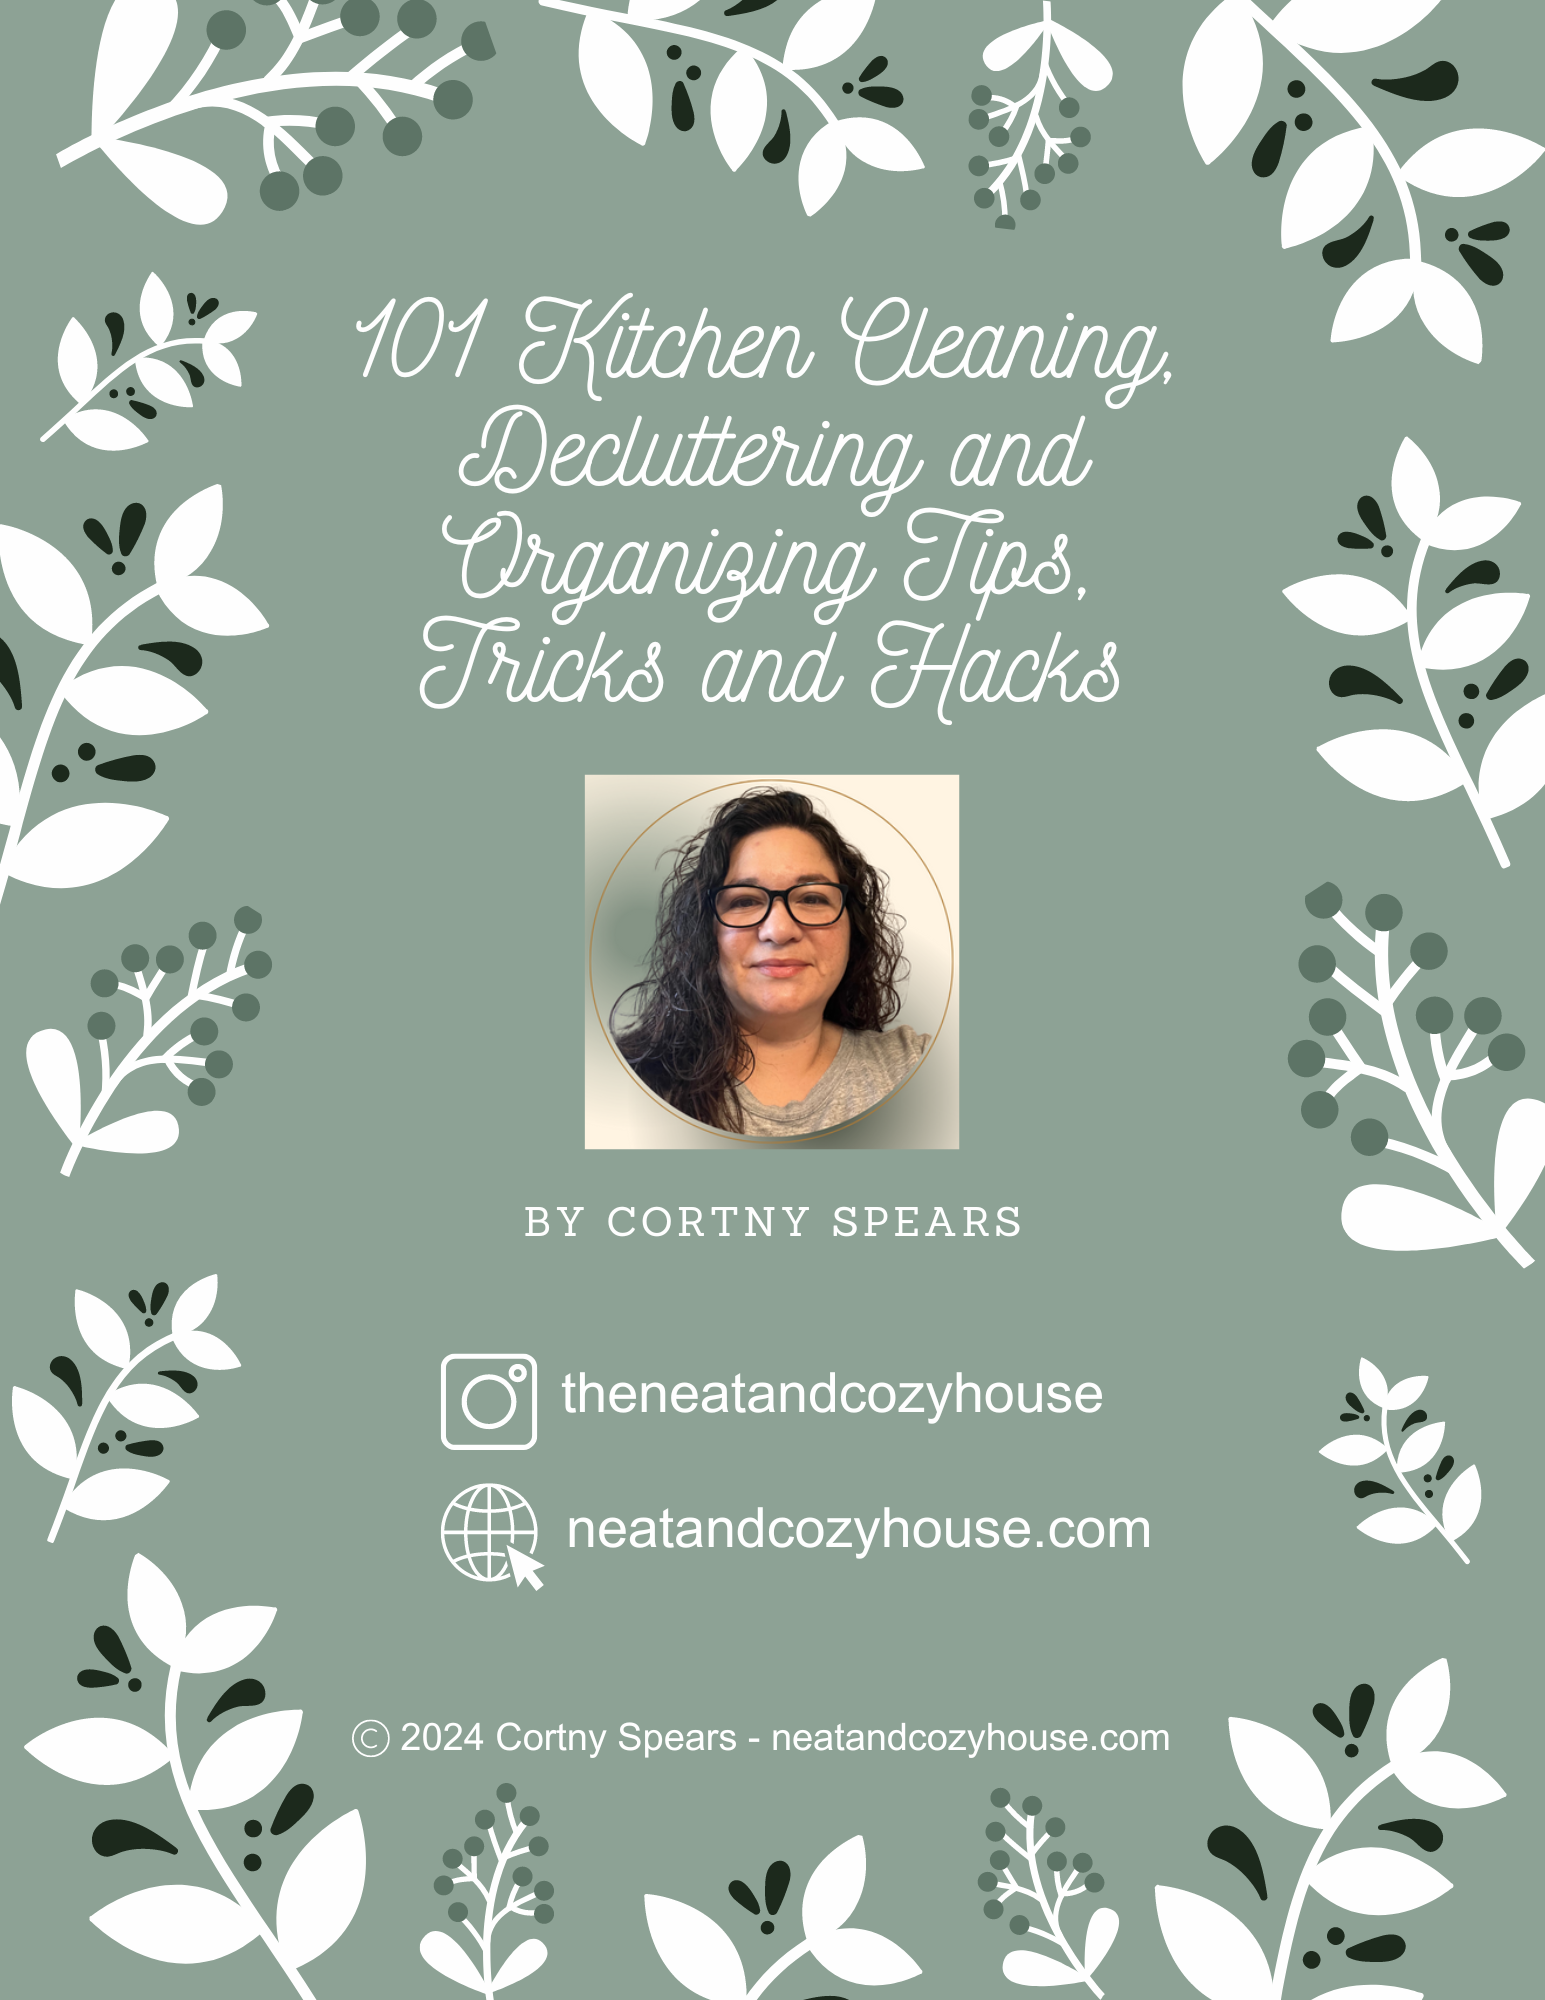 101 Kitchen Cleaning, Decluttering and Organizing Tips, Tricks and Hacks